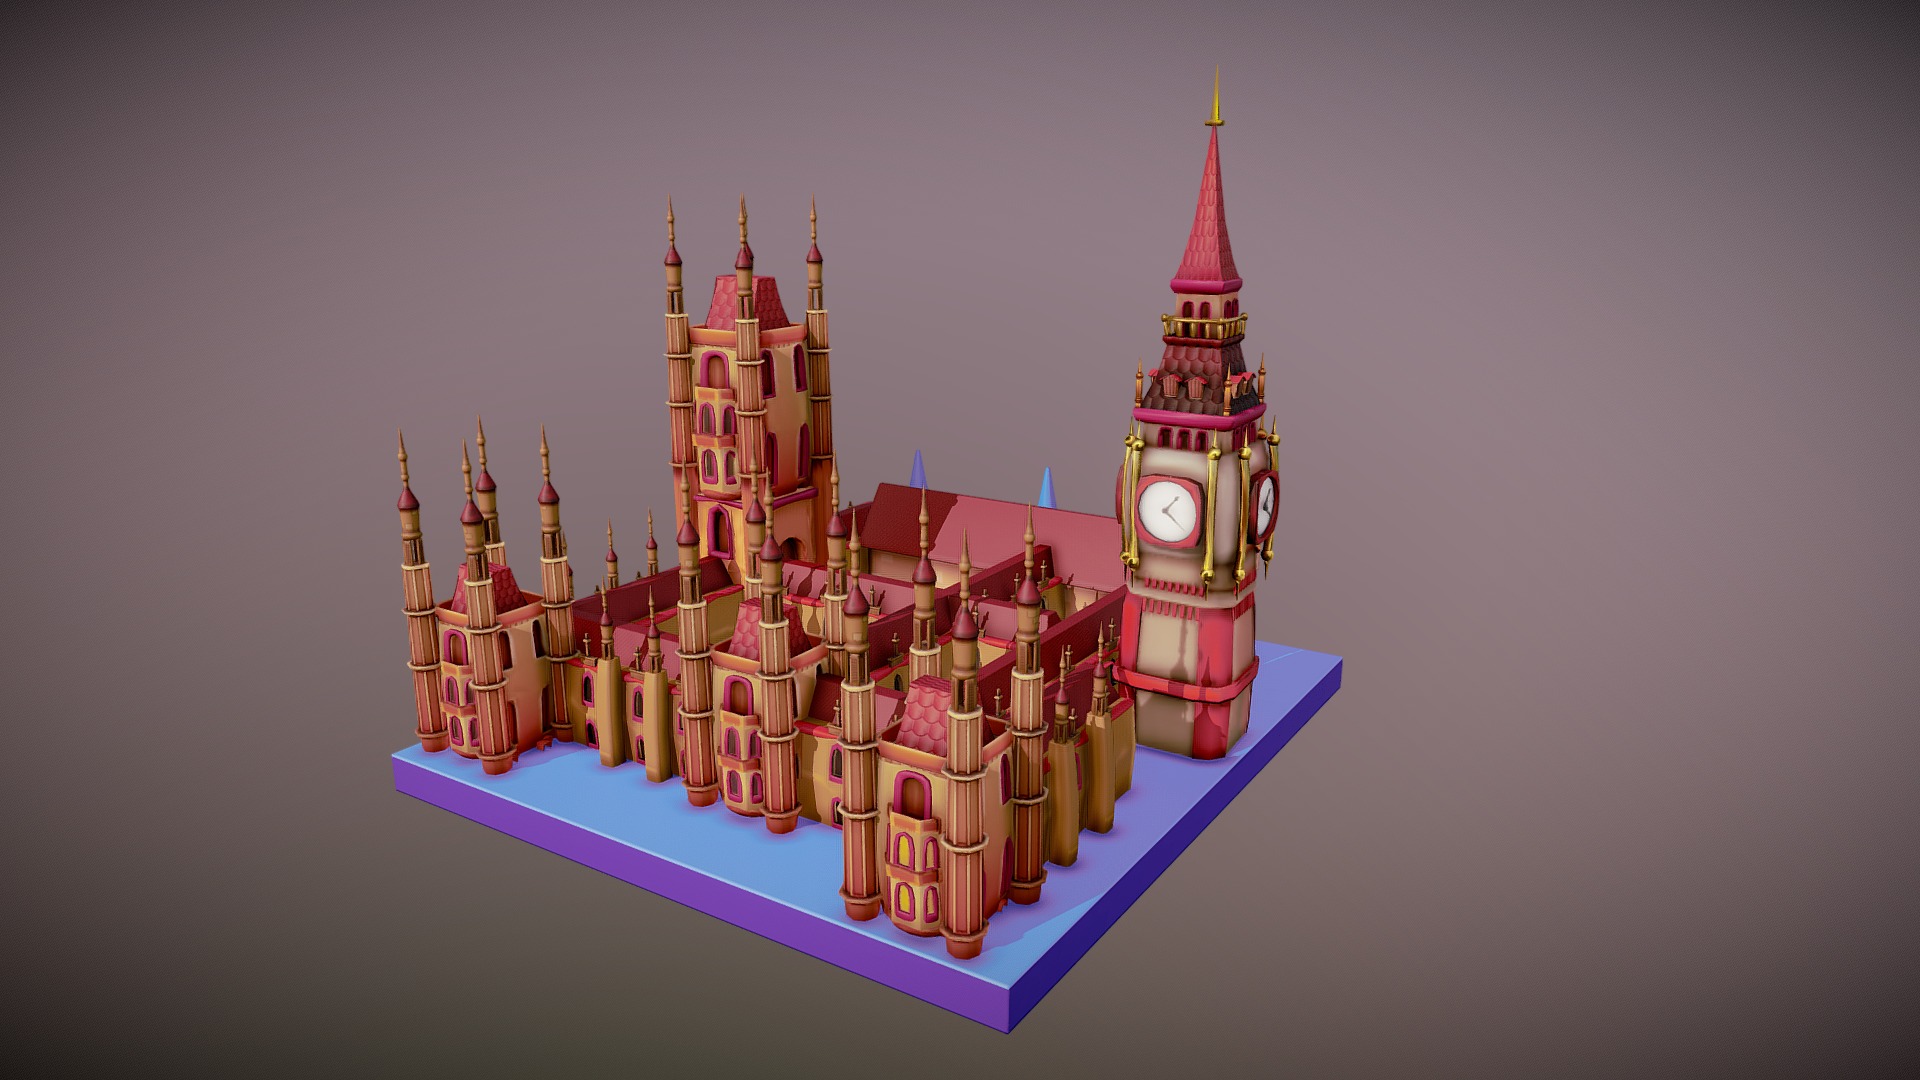 3D model Big Ben & Parliament Building - This is a 3D model of the Big Ben & Parliament Building. The 3D model is about a colorful castle with many pointed roofs.